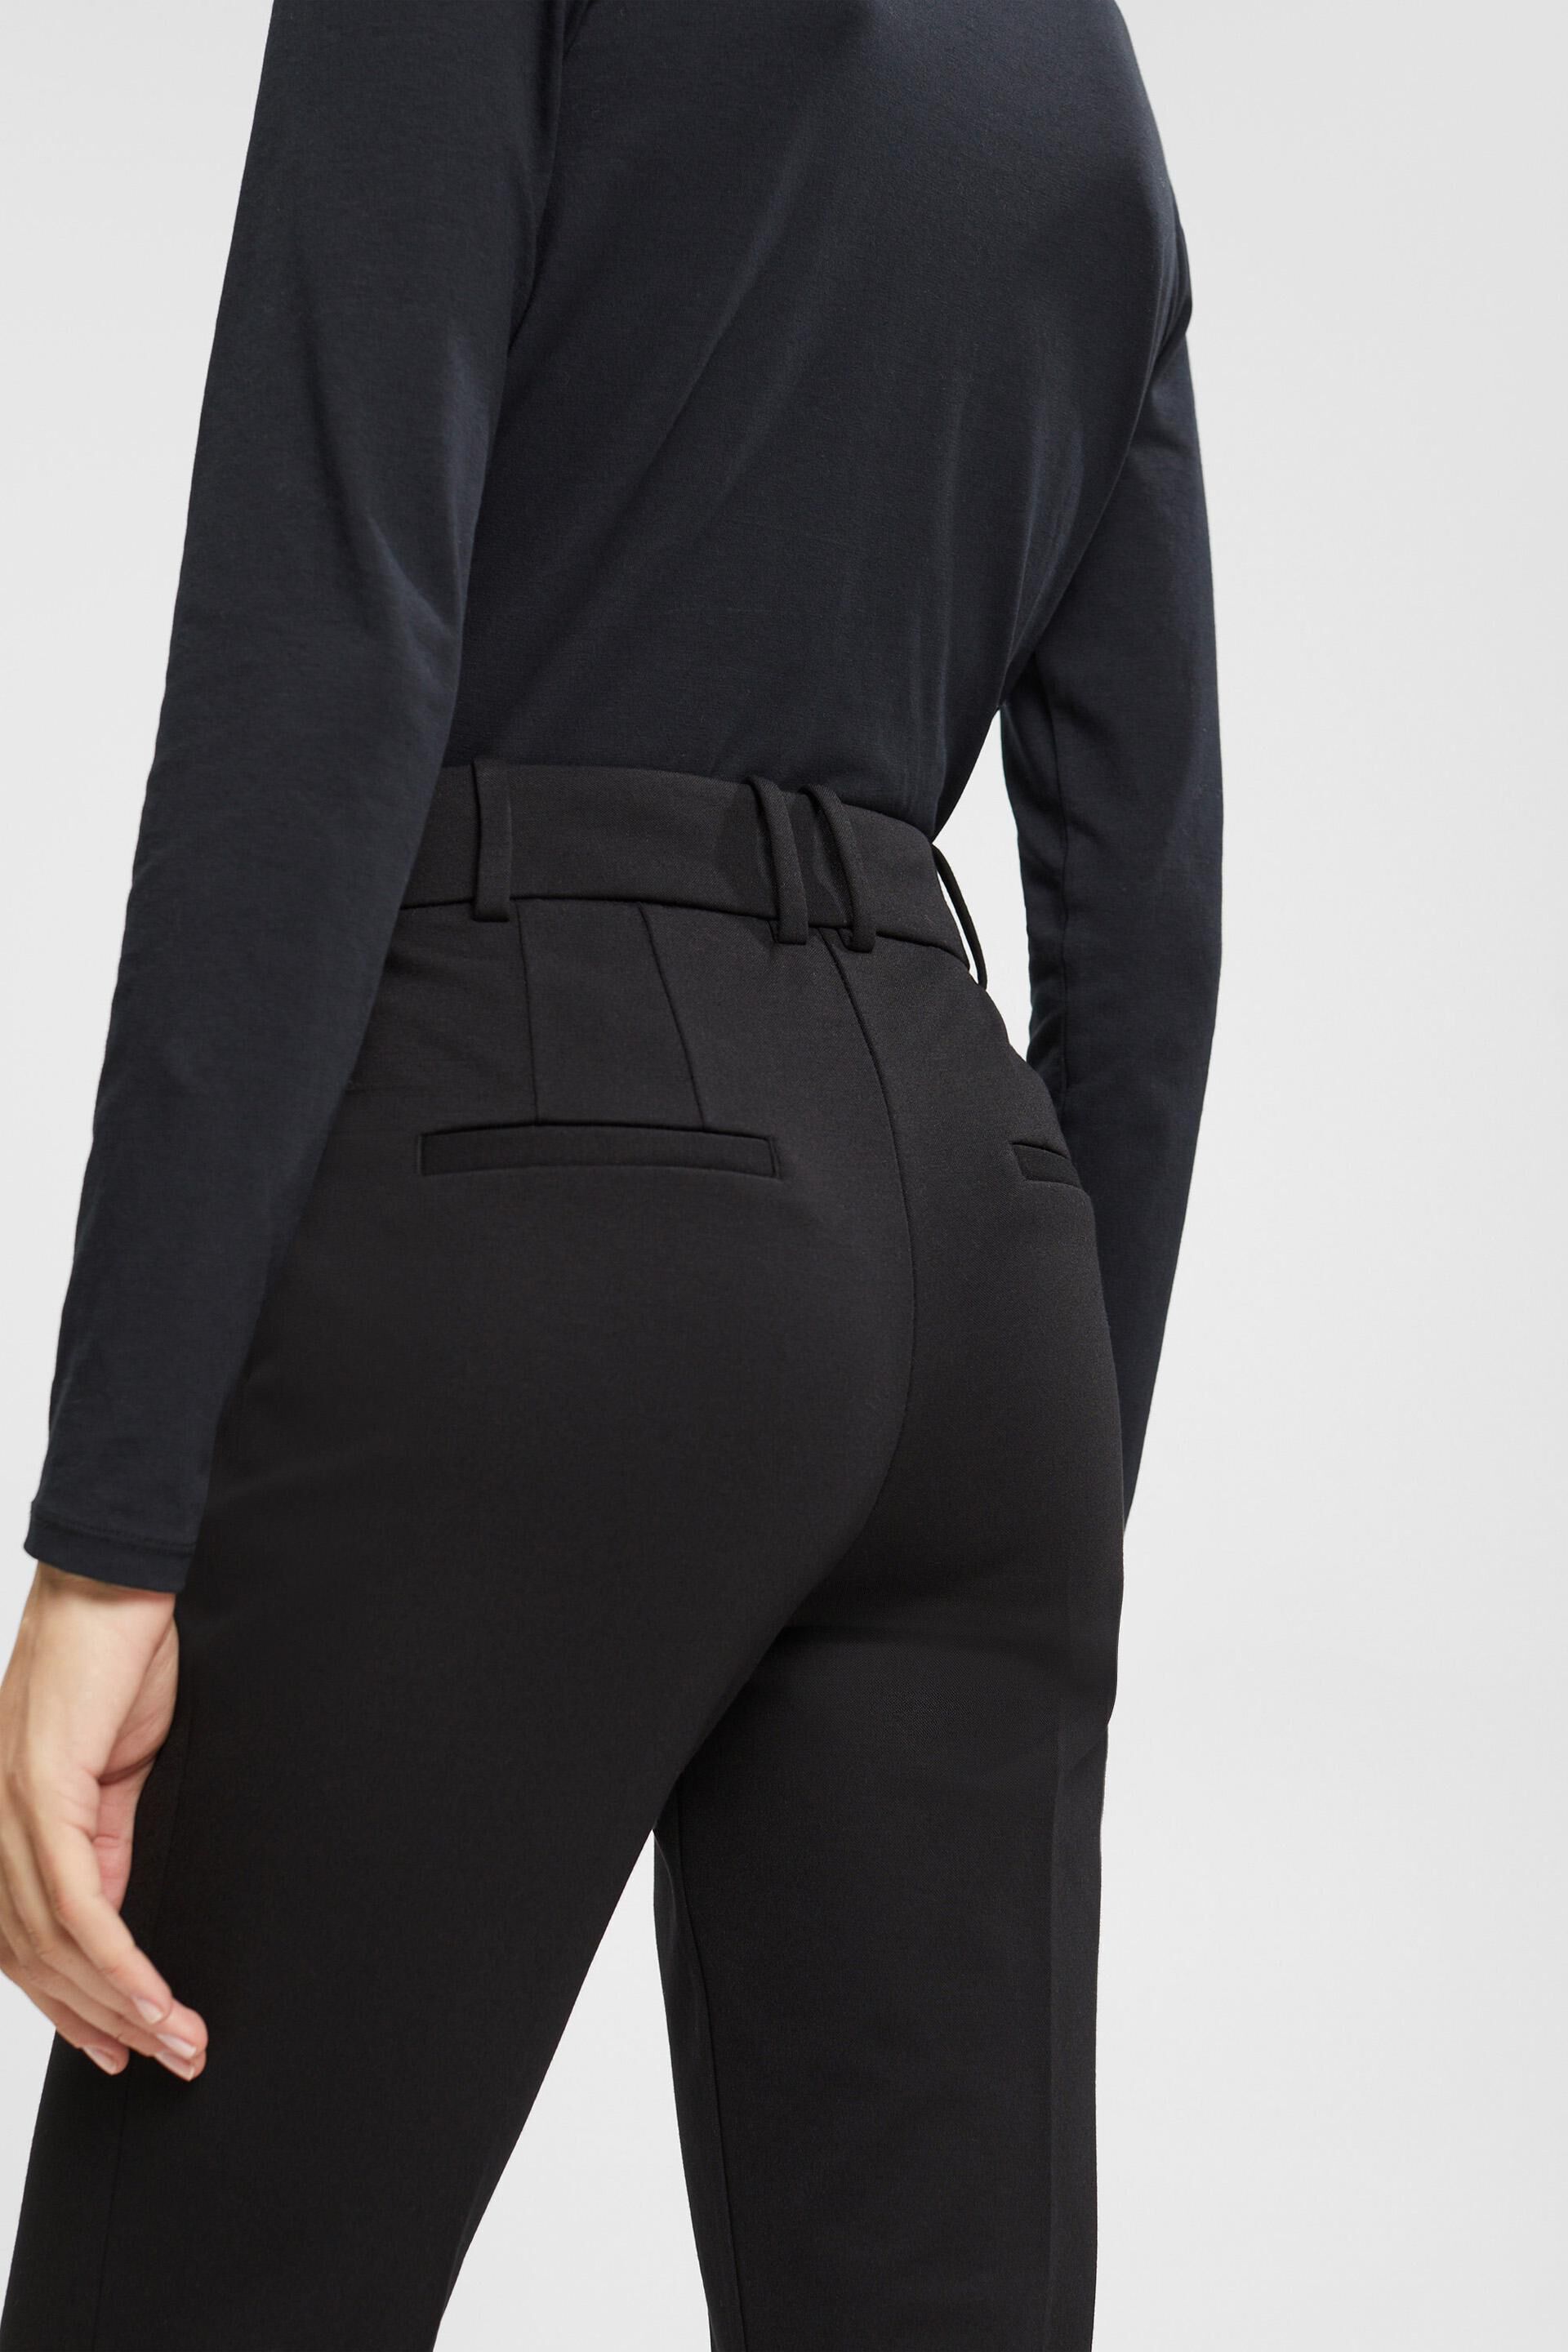 4 Way Stretch Slim Bootcut Trousers | M&S Collection | M&S